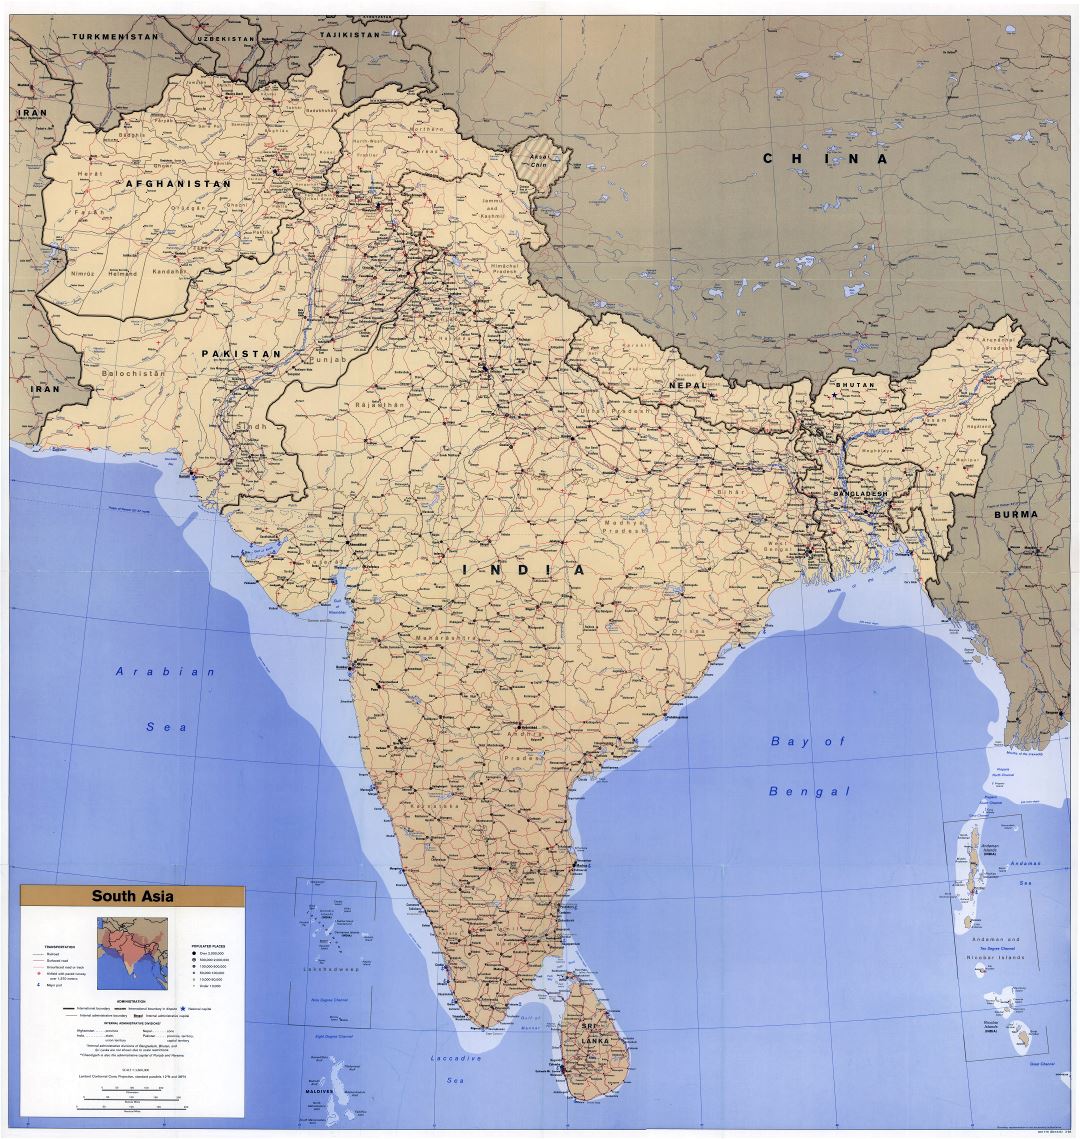 Large scale detailed political map of South Asia with roads, railroads, cities, airports and seaports - 1993